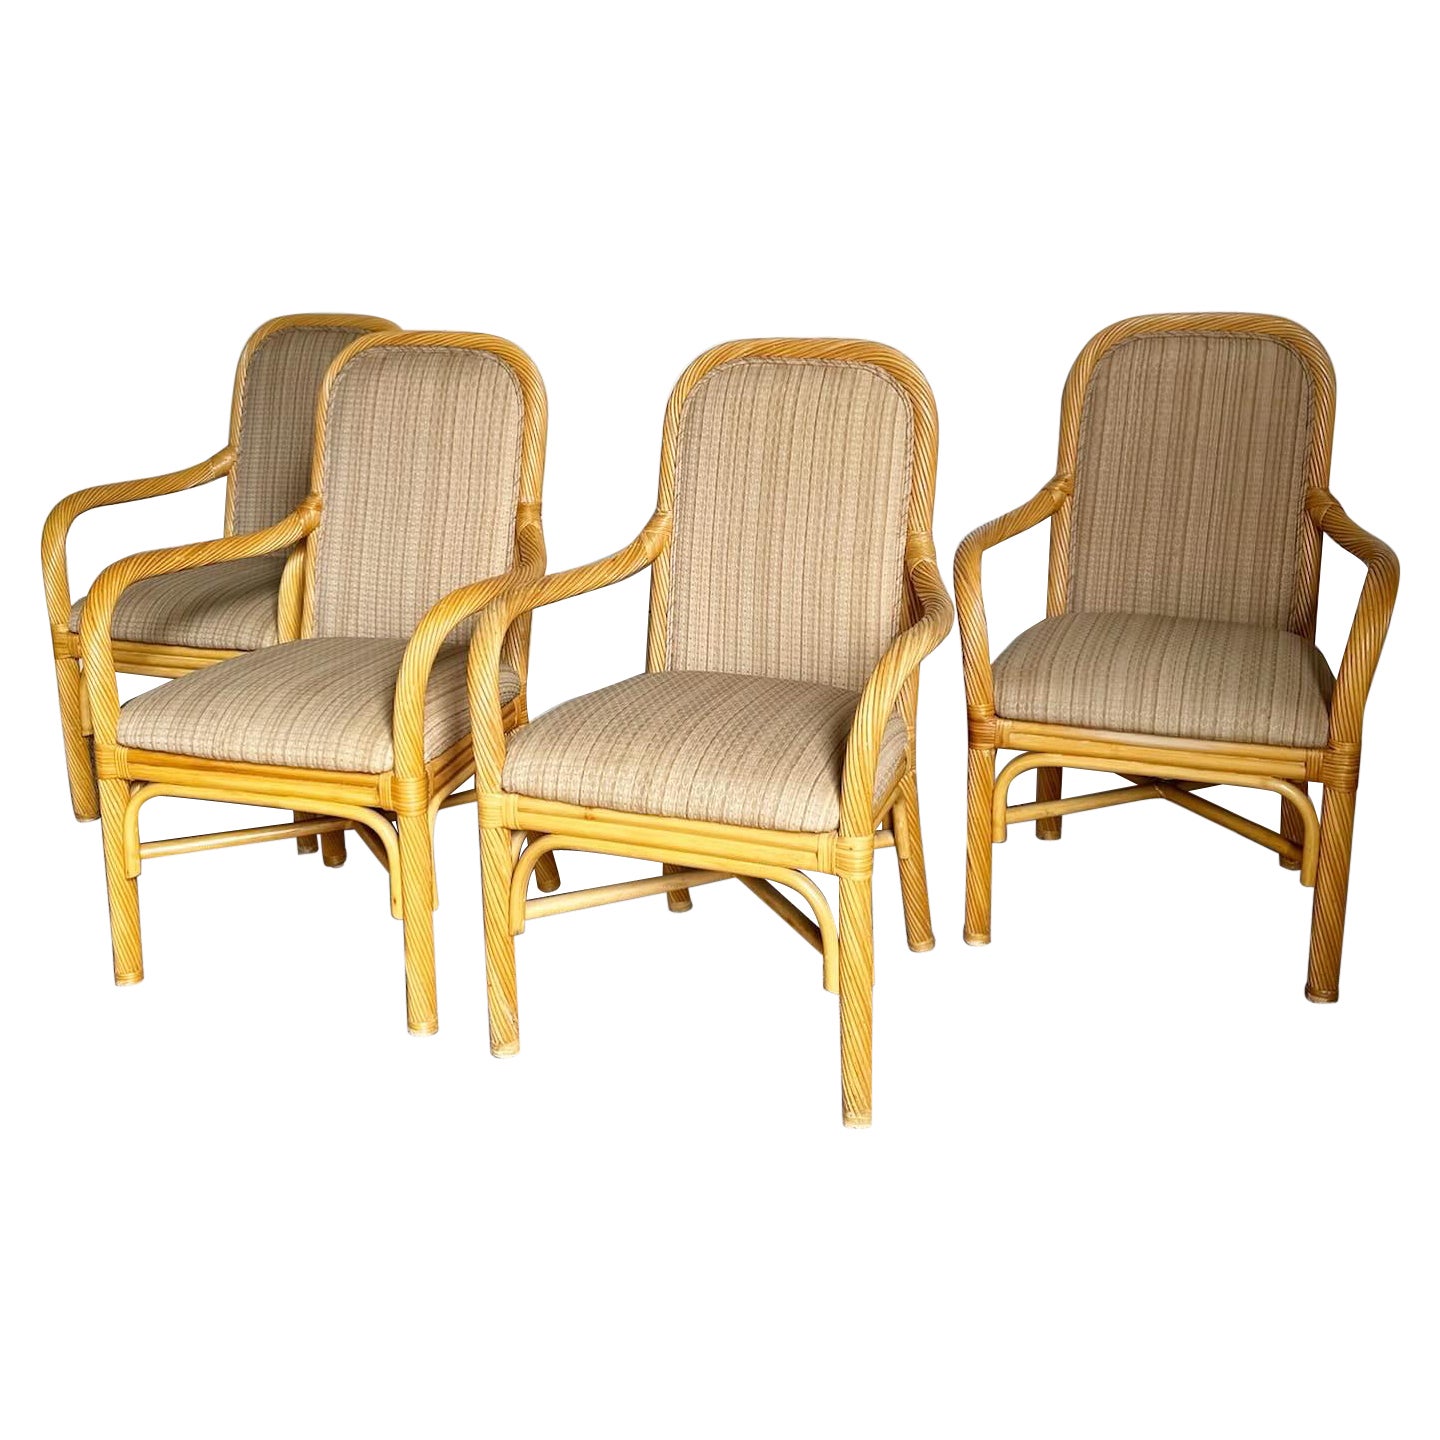 Boho Chic Twisted Pencil Reed Rattan Arm Dining Chairs - Set of 4